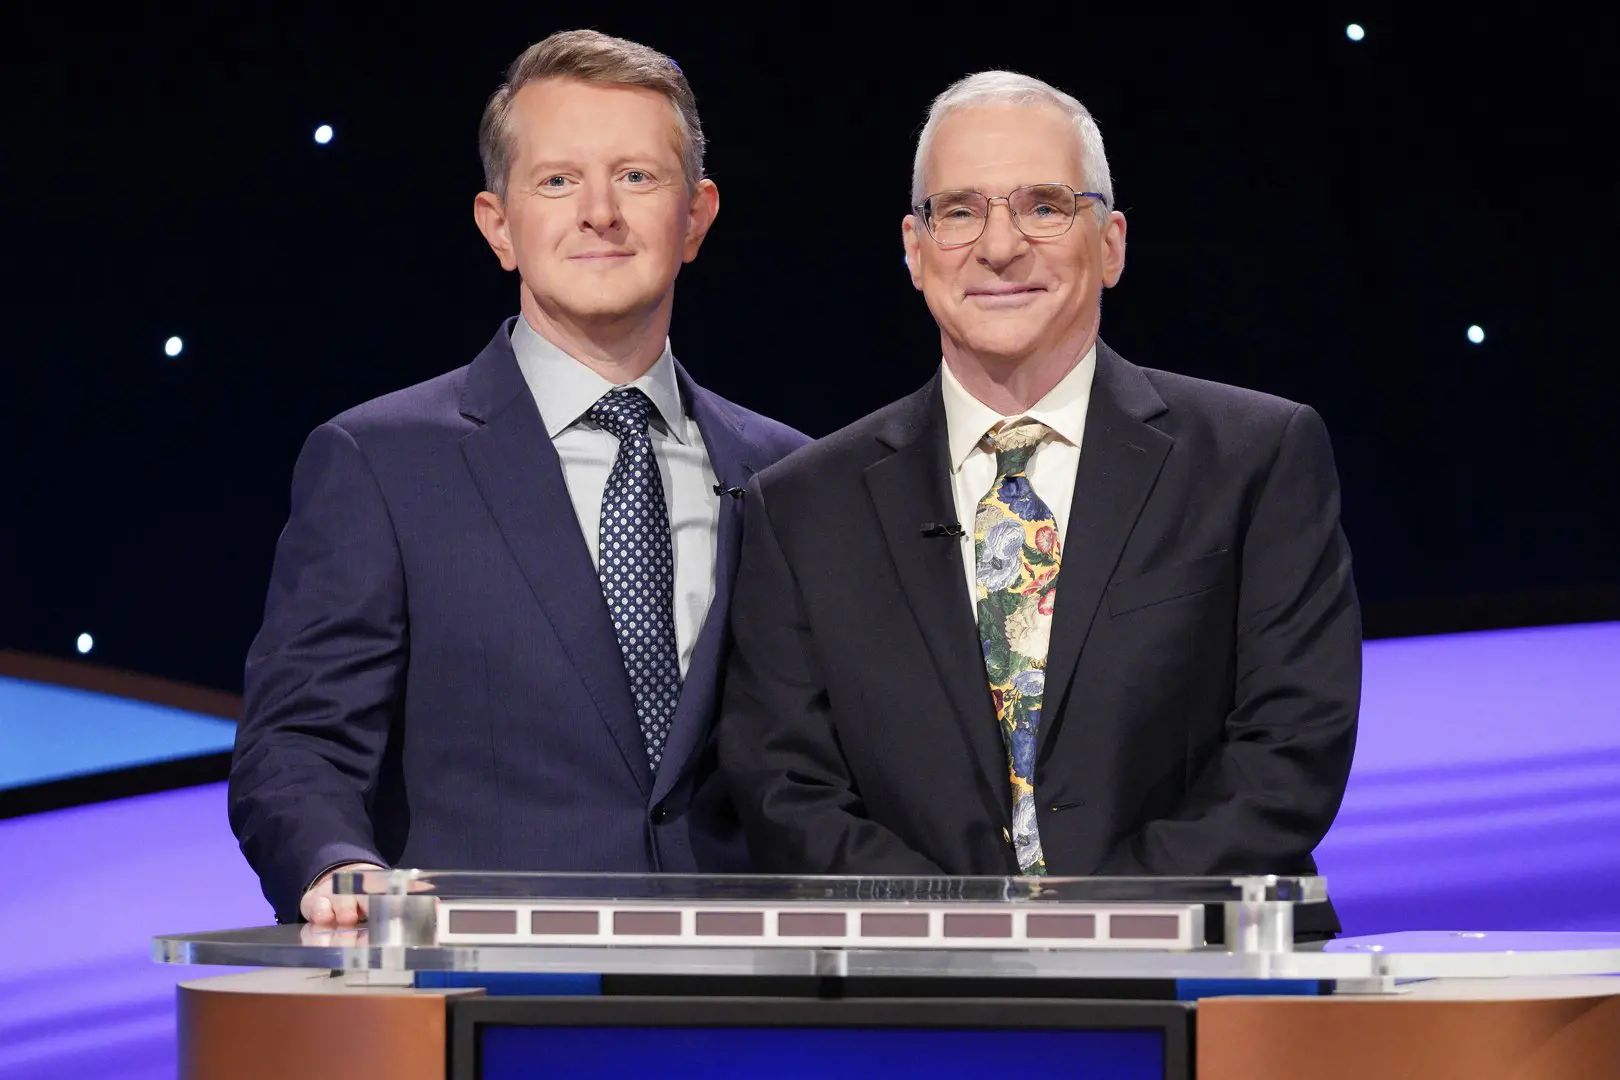 Sam Buttrey is the oldest champion on Jeopardy Masters 2023